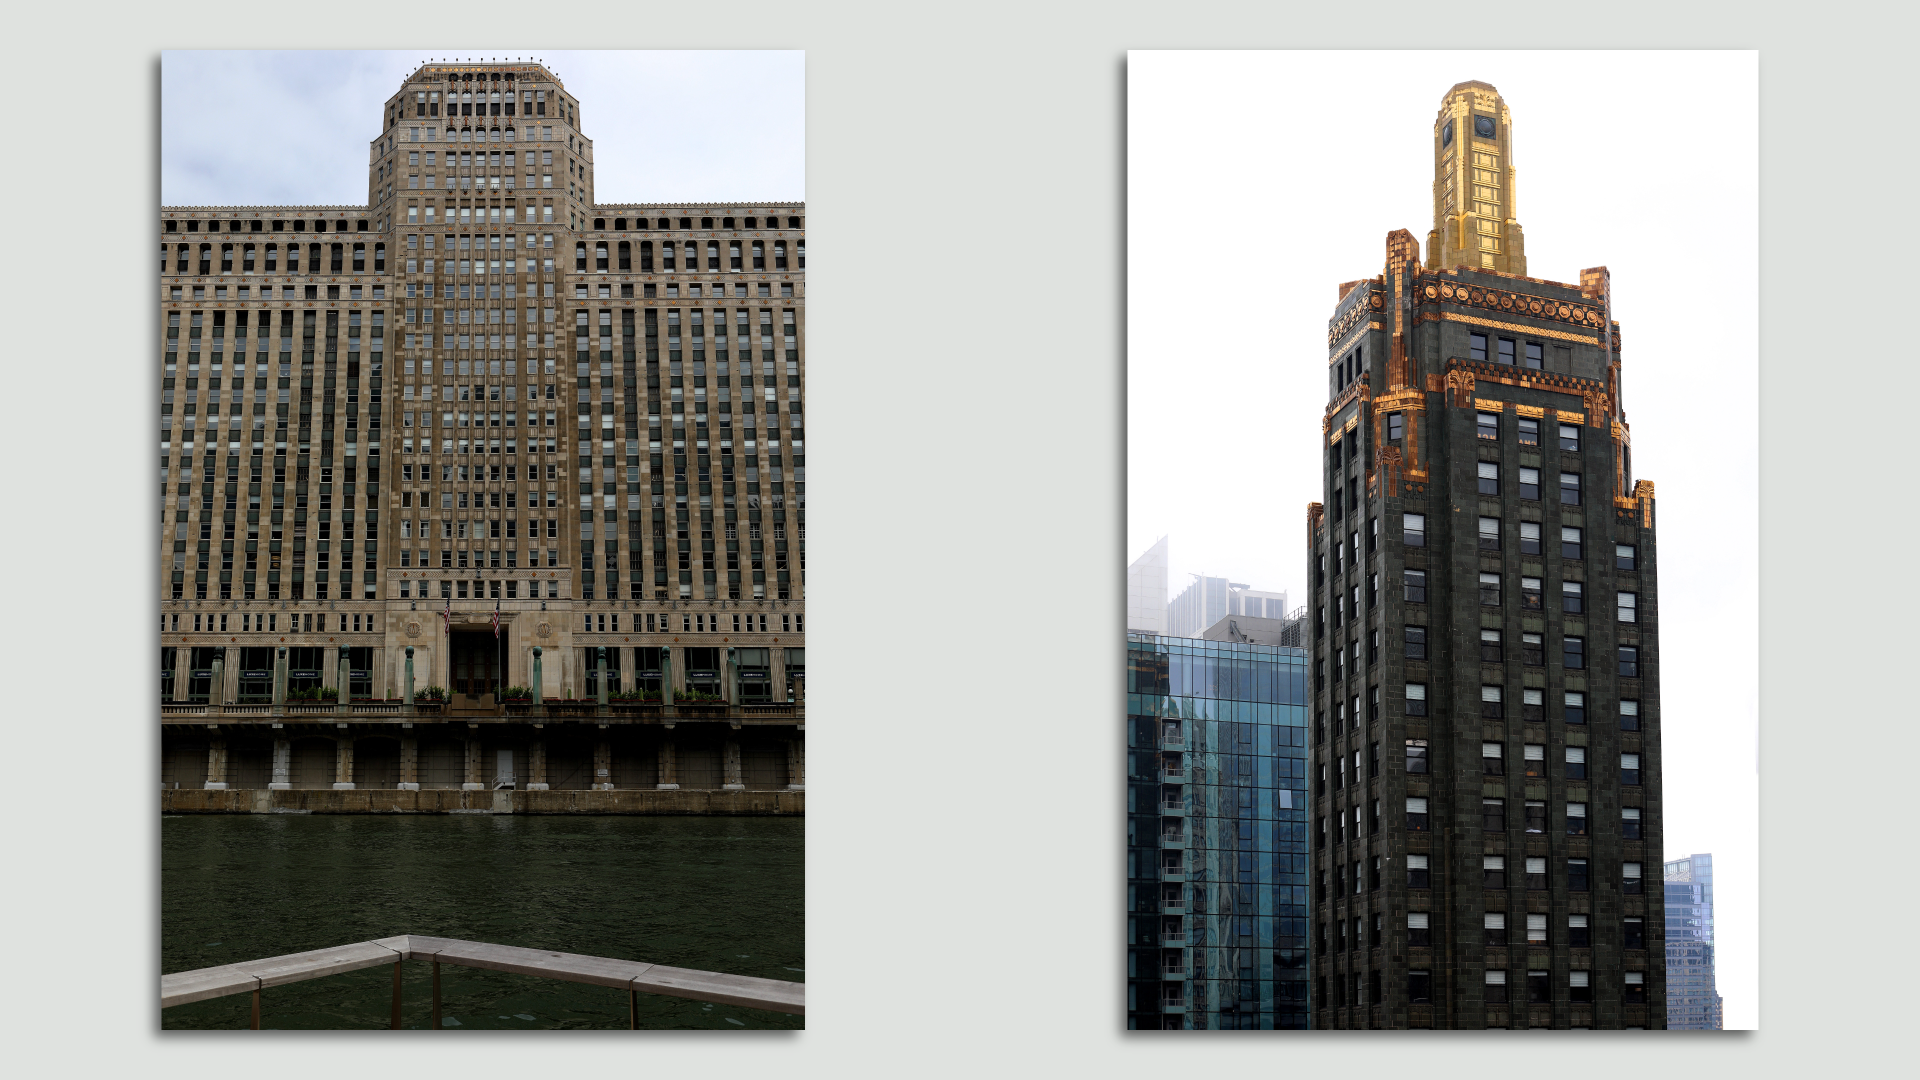 Photos of buildings side by side. 